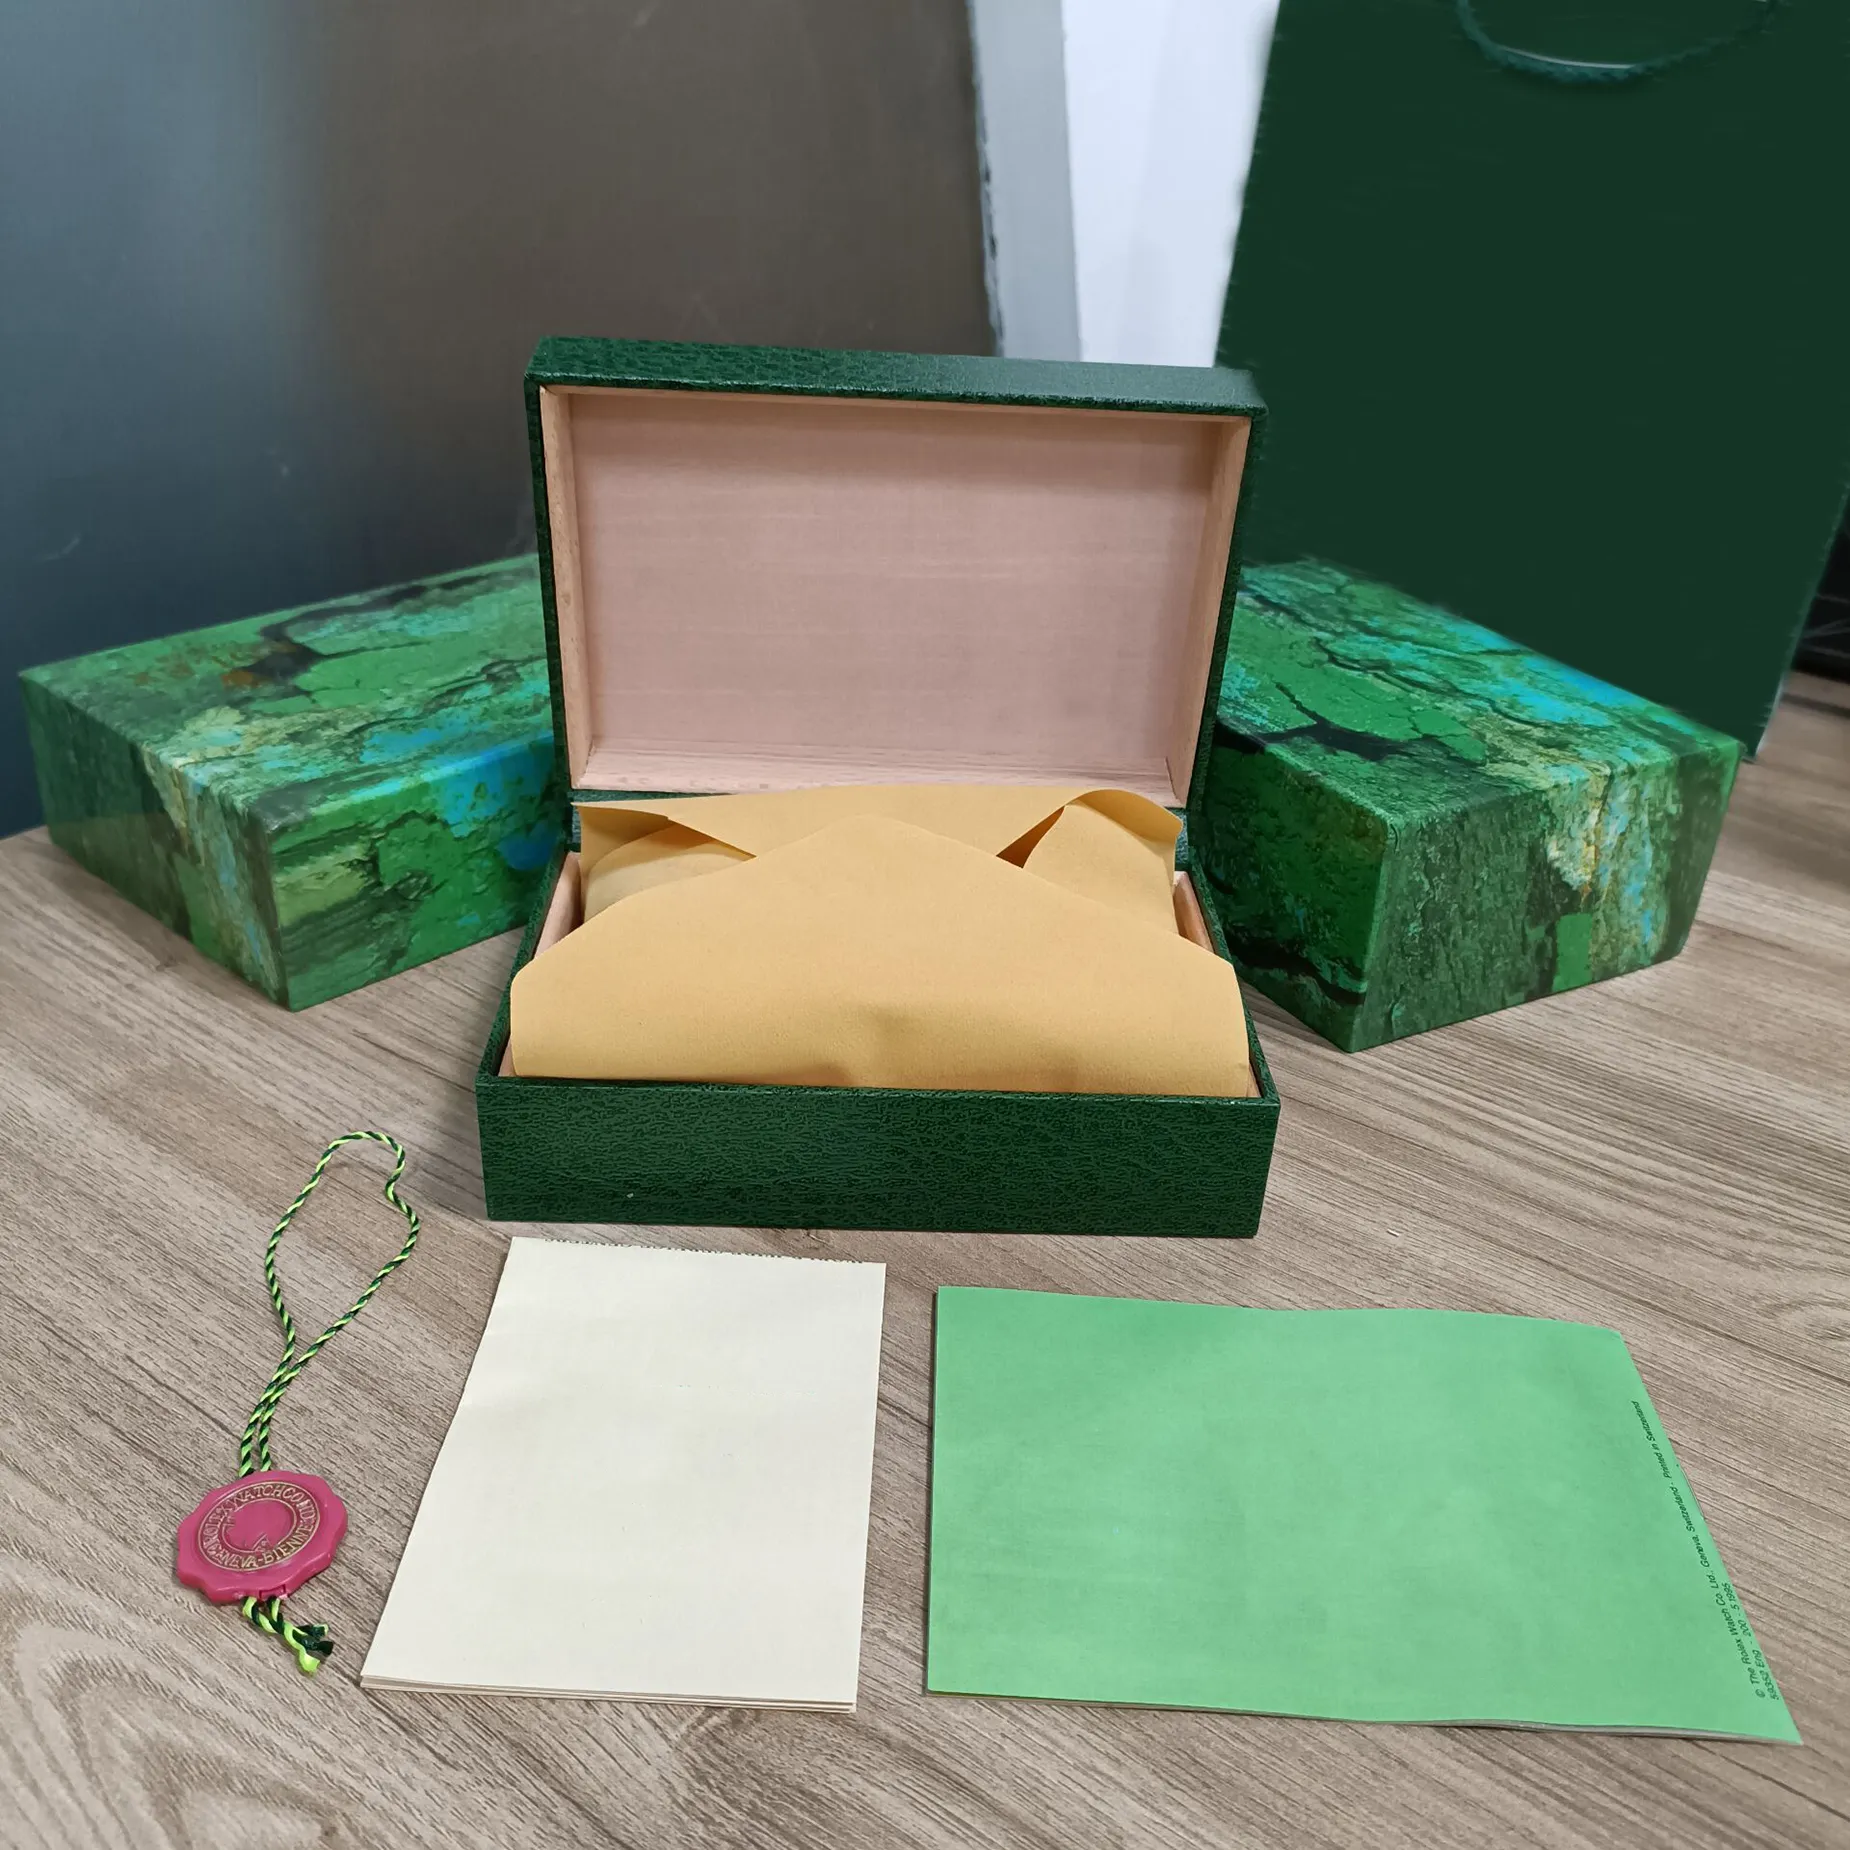 L Green Cases Man Women Watch Wood luxury box Paper bags Certificate Original Boxes Wooden Woman Watches Gift Box Accessories Surprise Factory Submarines